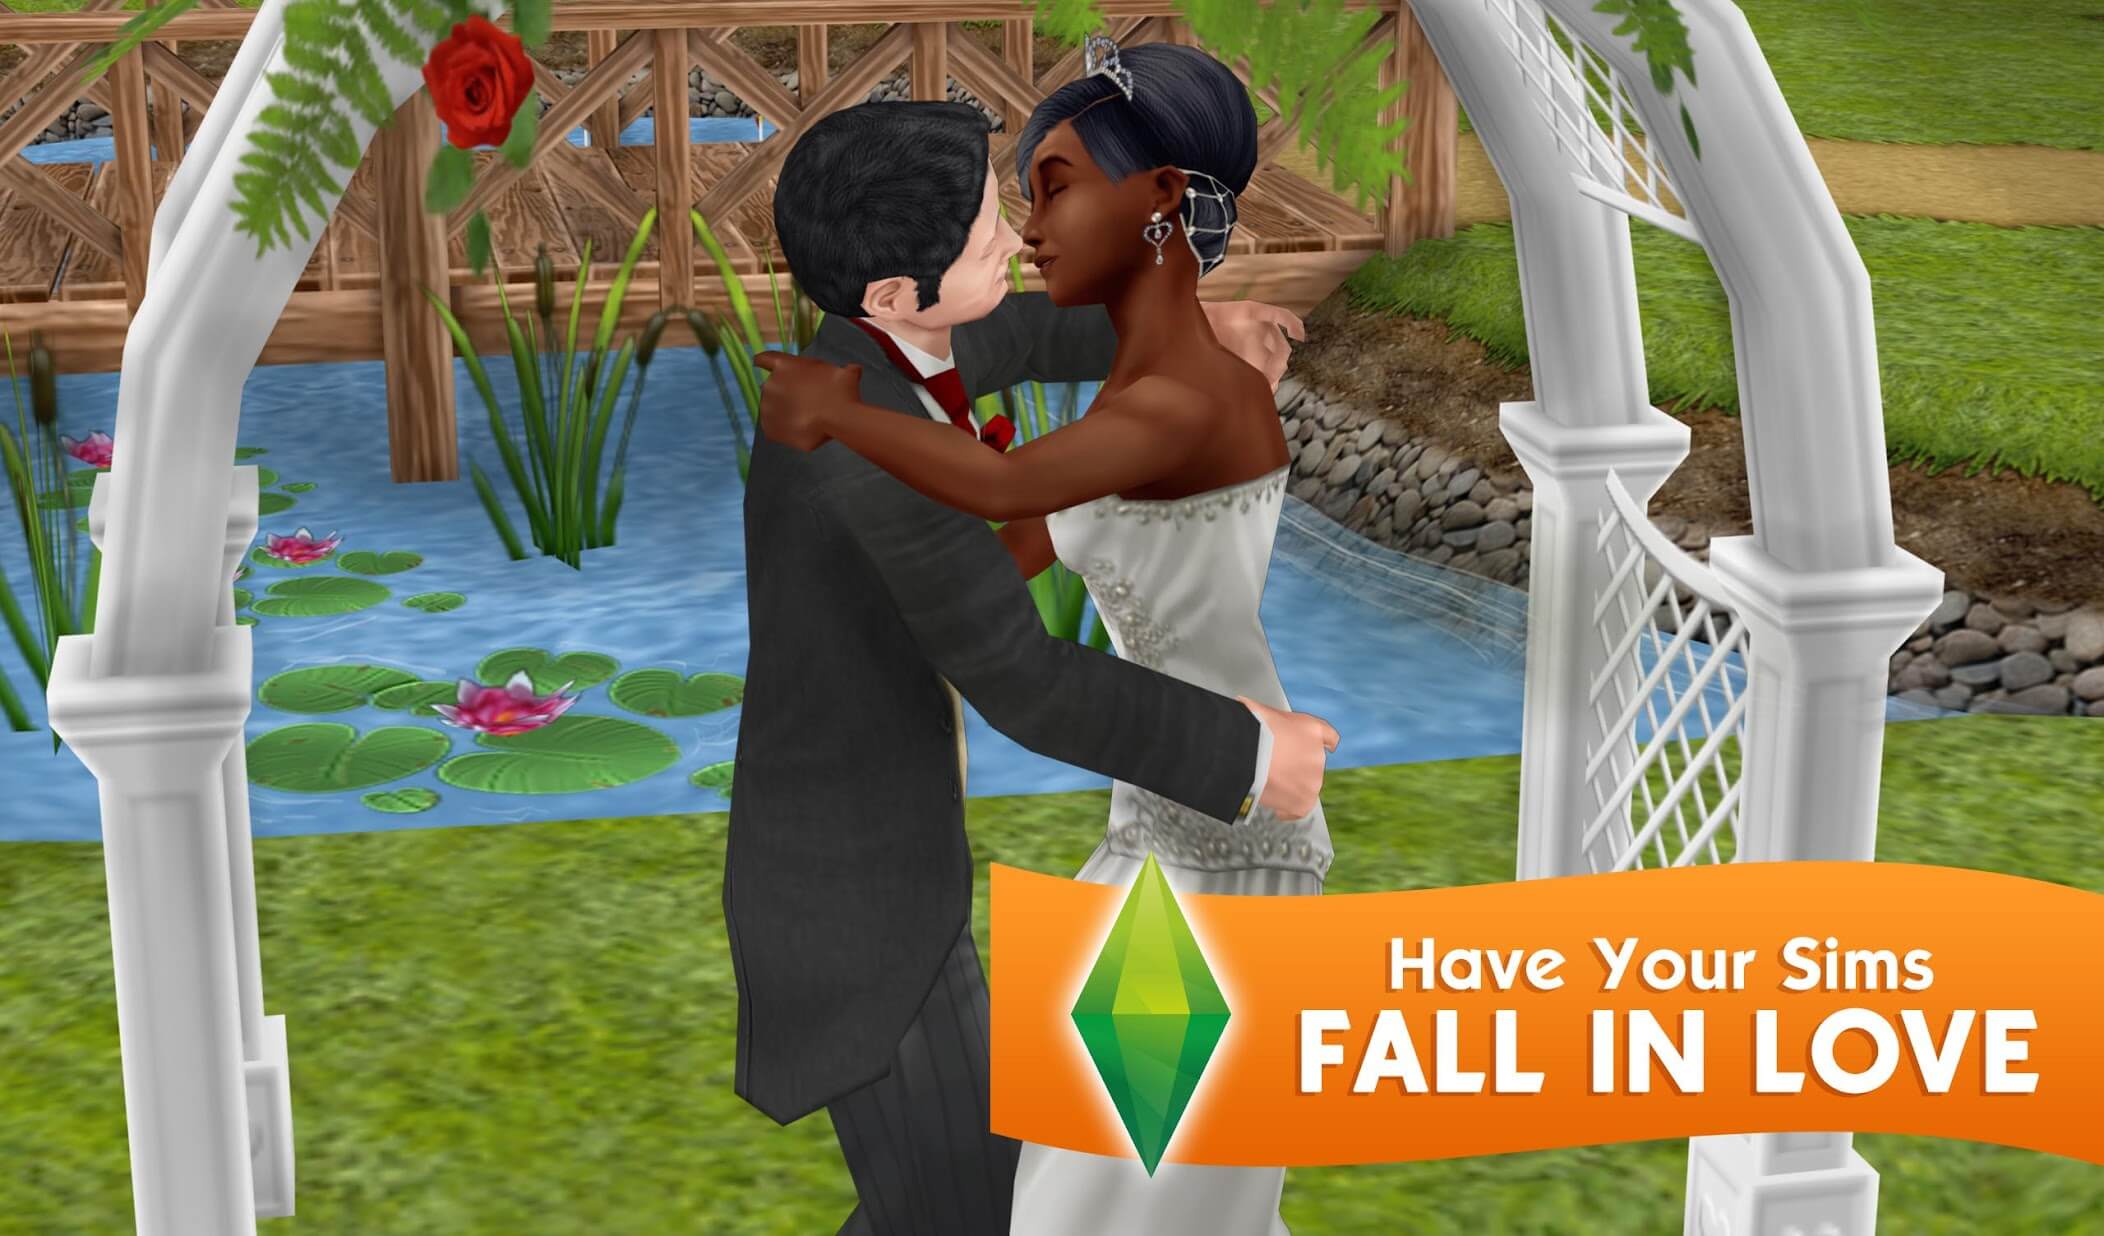 have your sims fall in love